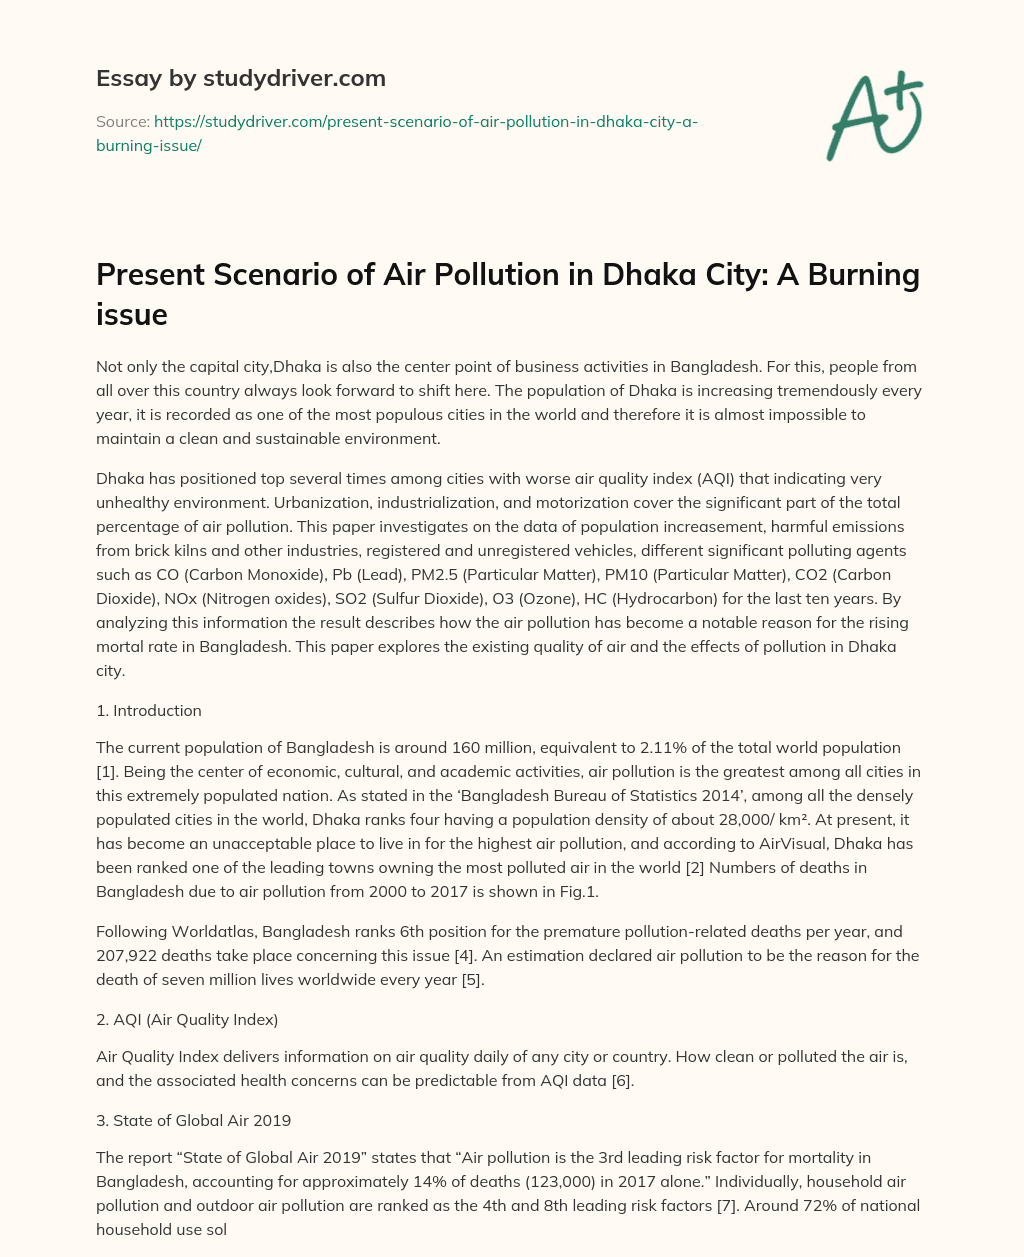 Present Scenario of Air Pollution in Dhaka City: a Burning Issue essay